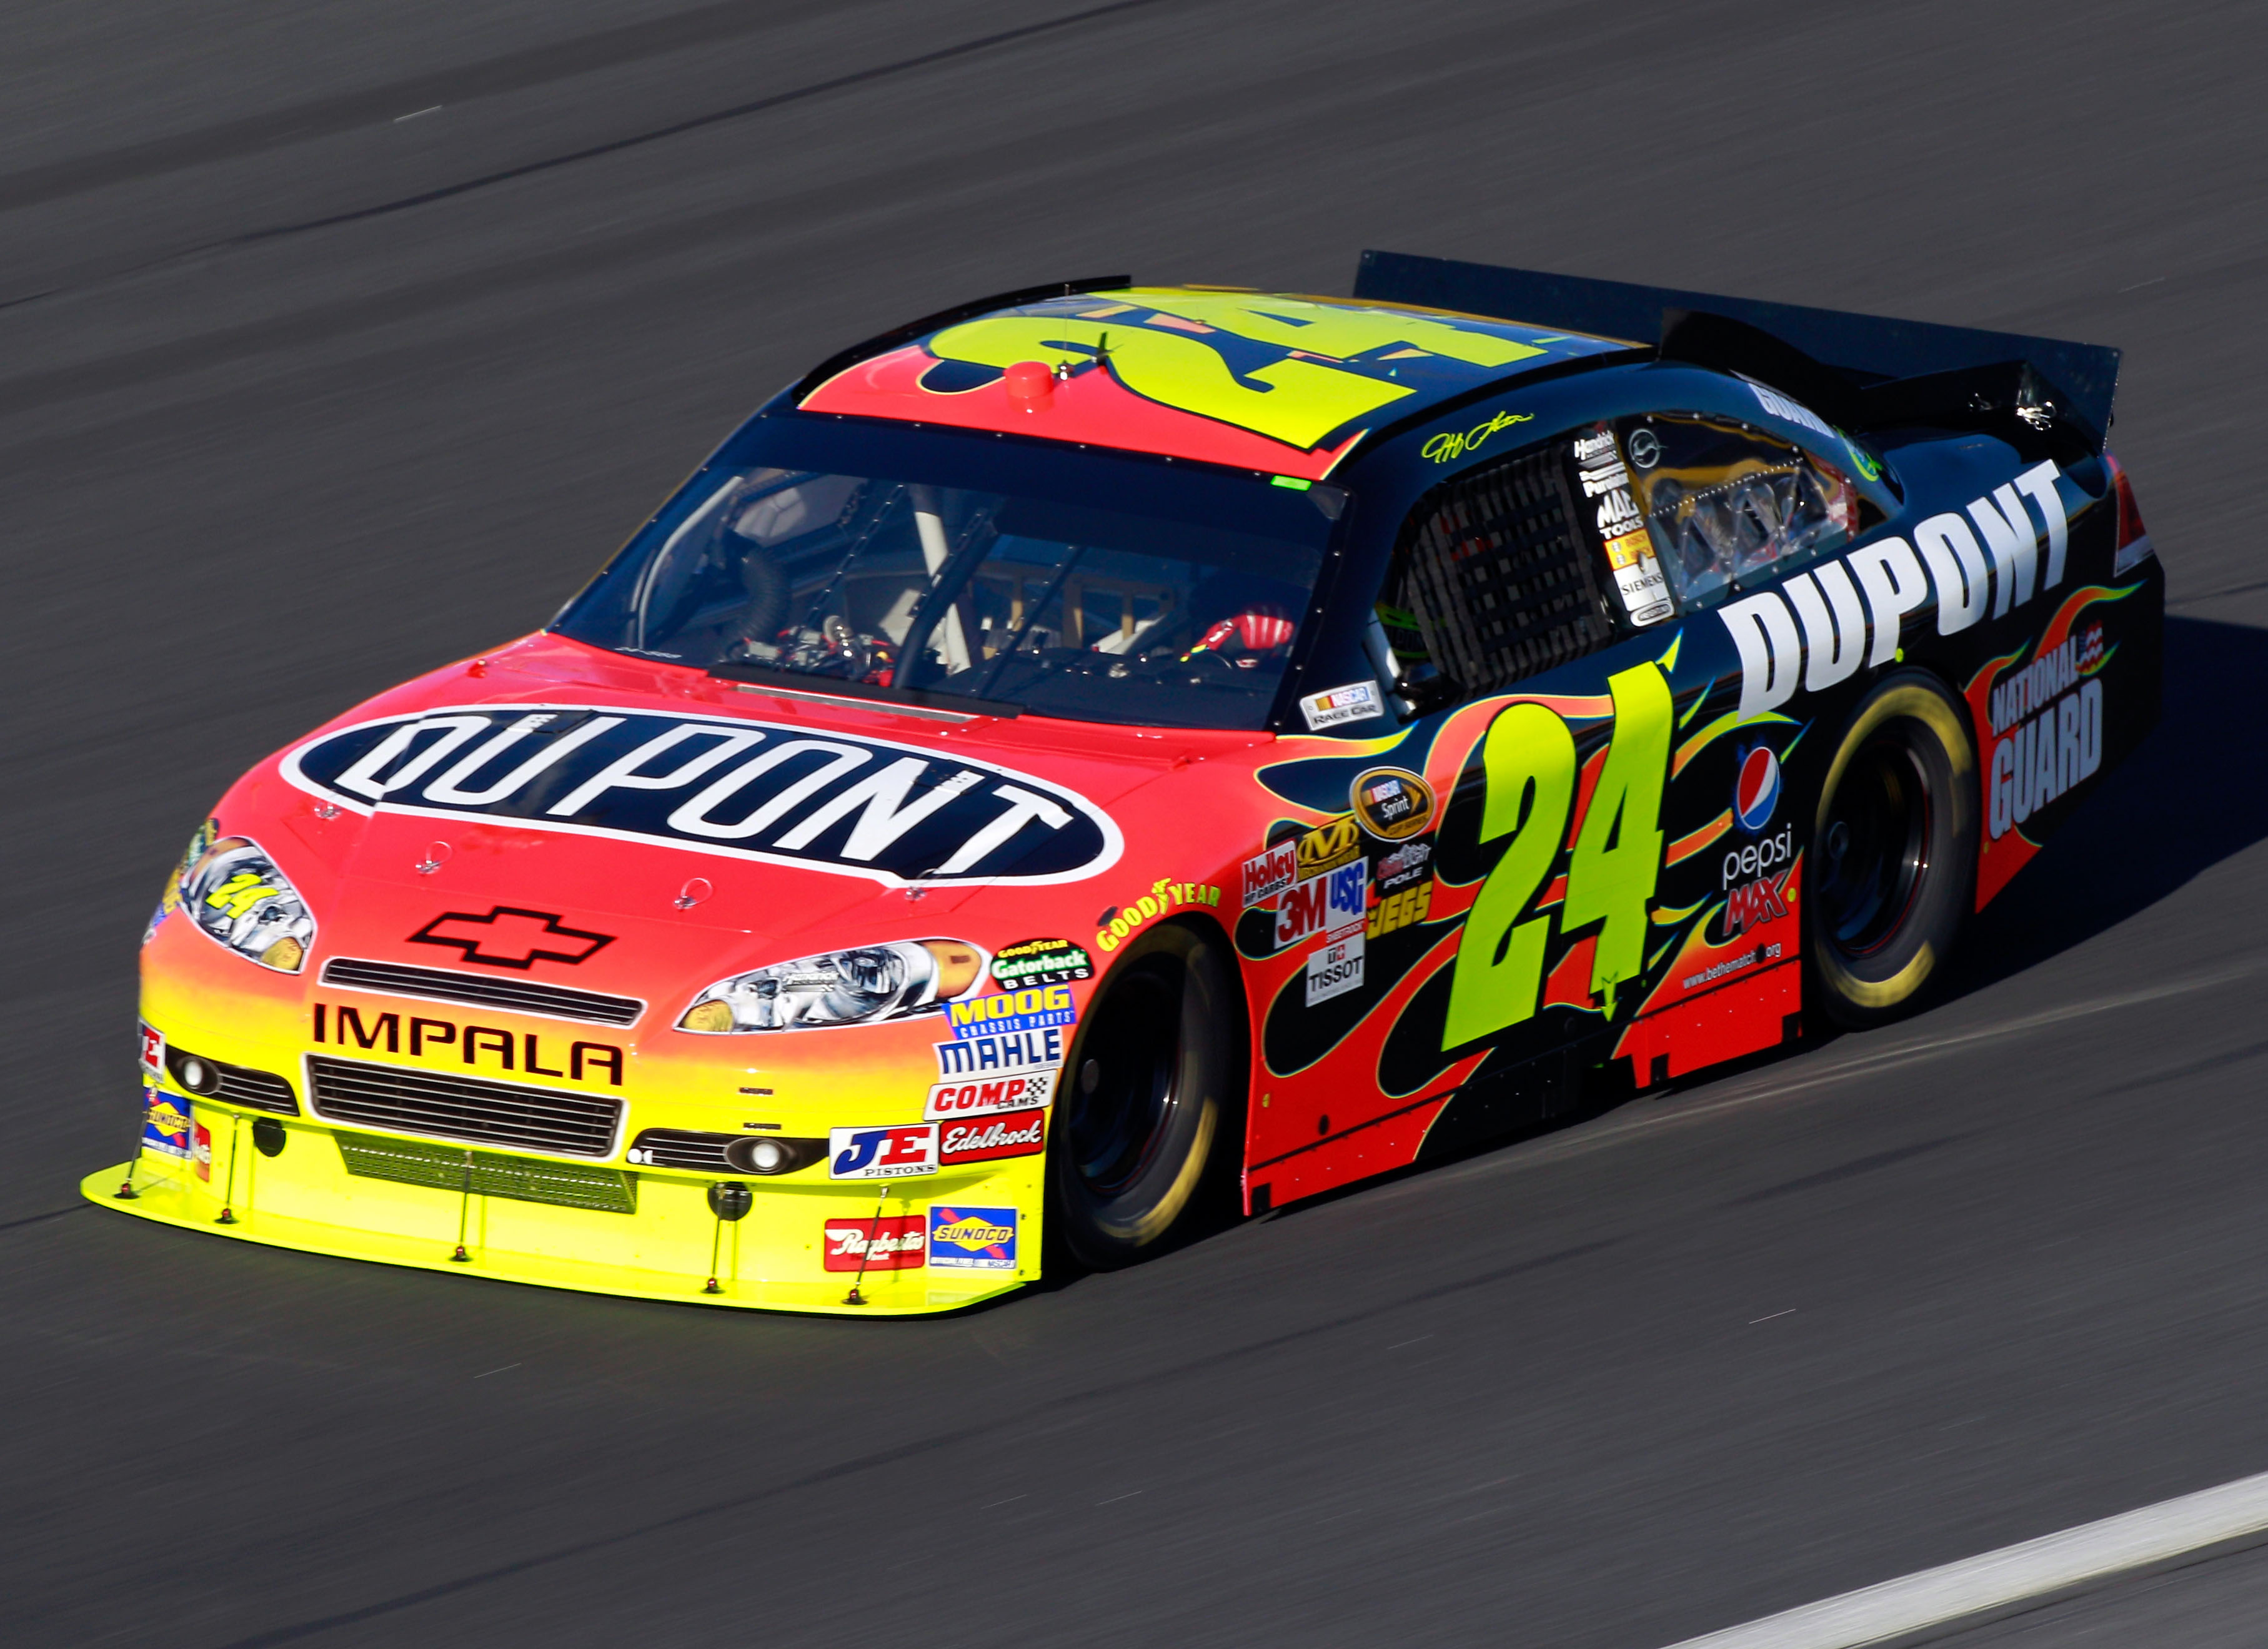 CONCORD, NC - OCTOBER 15:  Jeff Gordon drives the #24 DuPont Chevrolet during practice for the NASCAR Sprint Cup Series Bank of America 500 at Charlotte Motor Speedway on October 15, 2010 in Concord, North Carolina.  (Photo by Sam Greenwood/Getty Images)